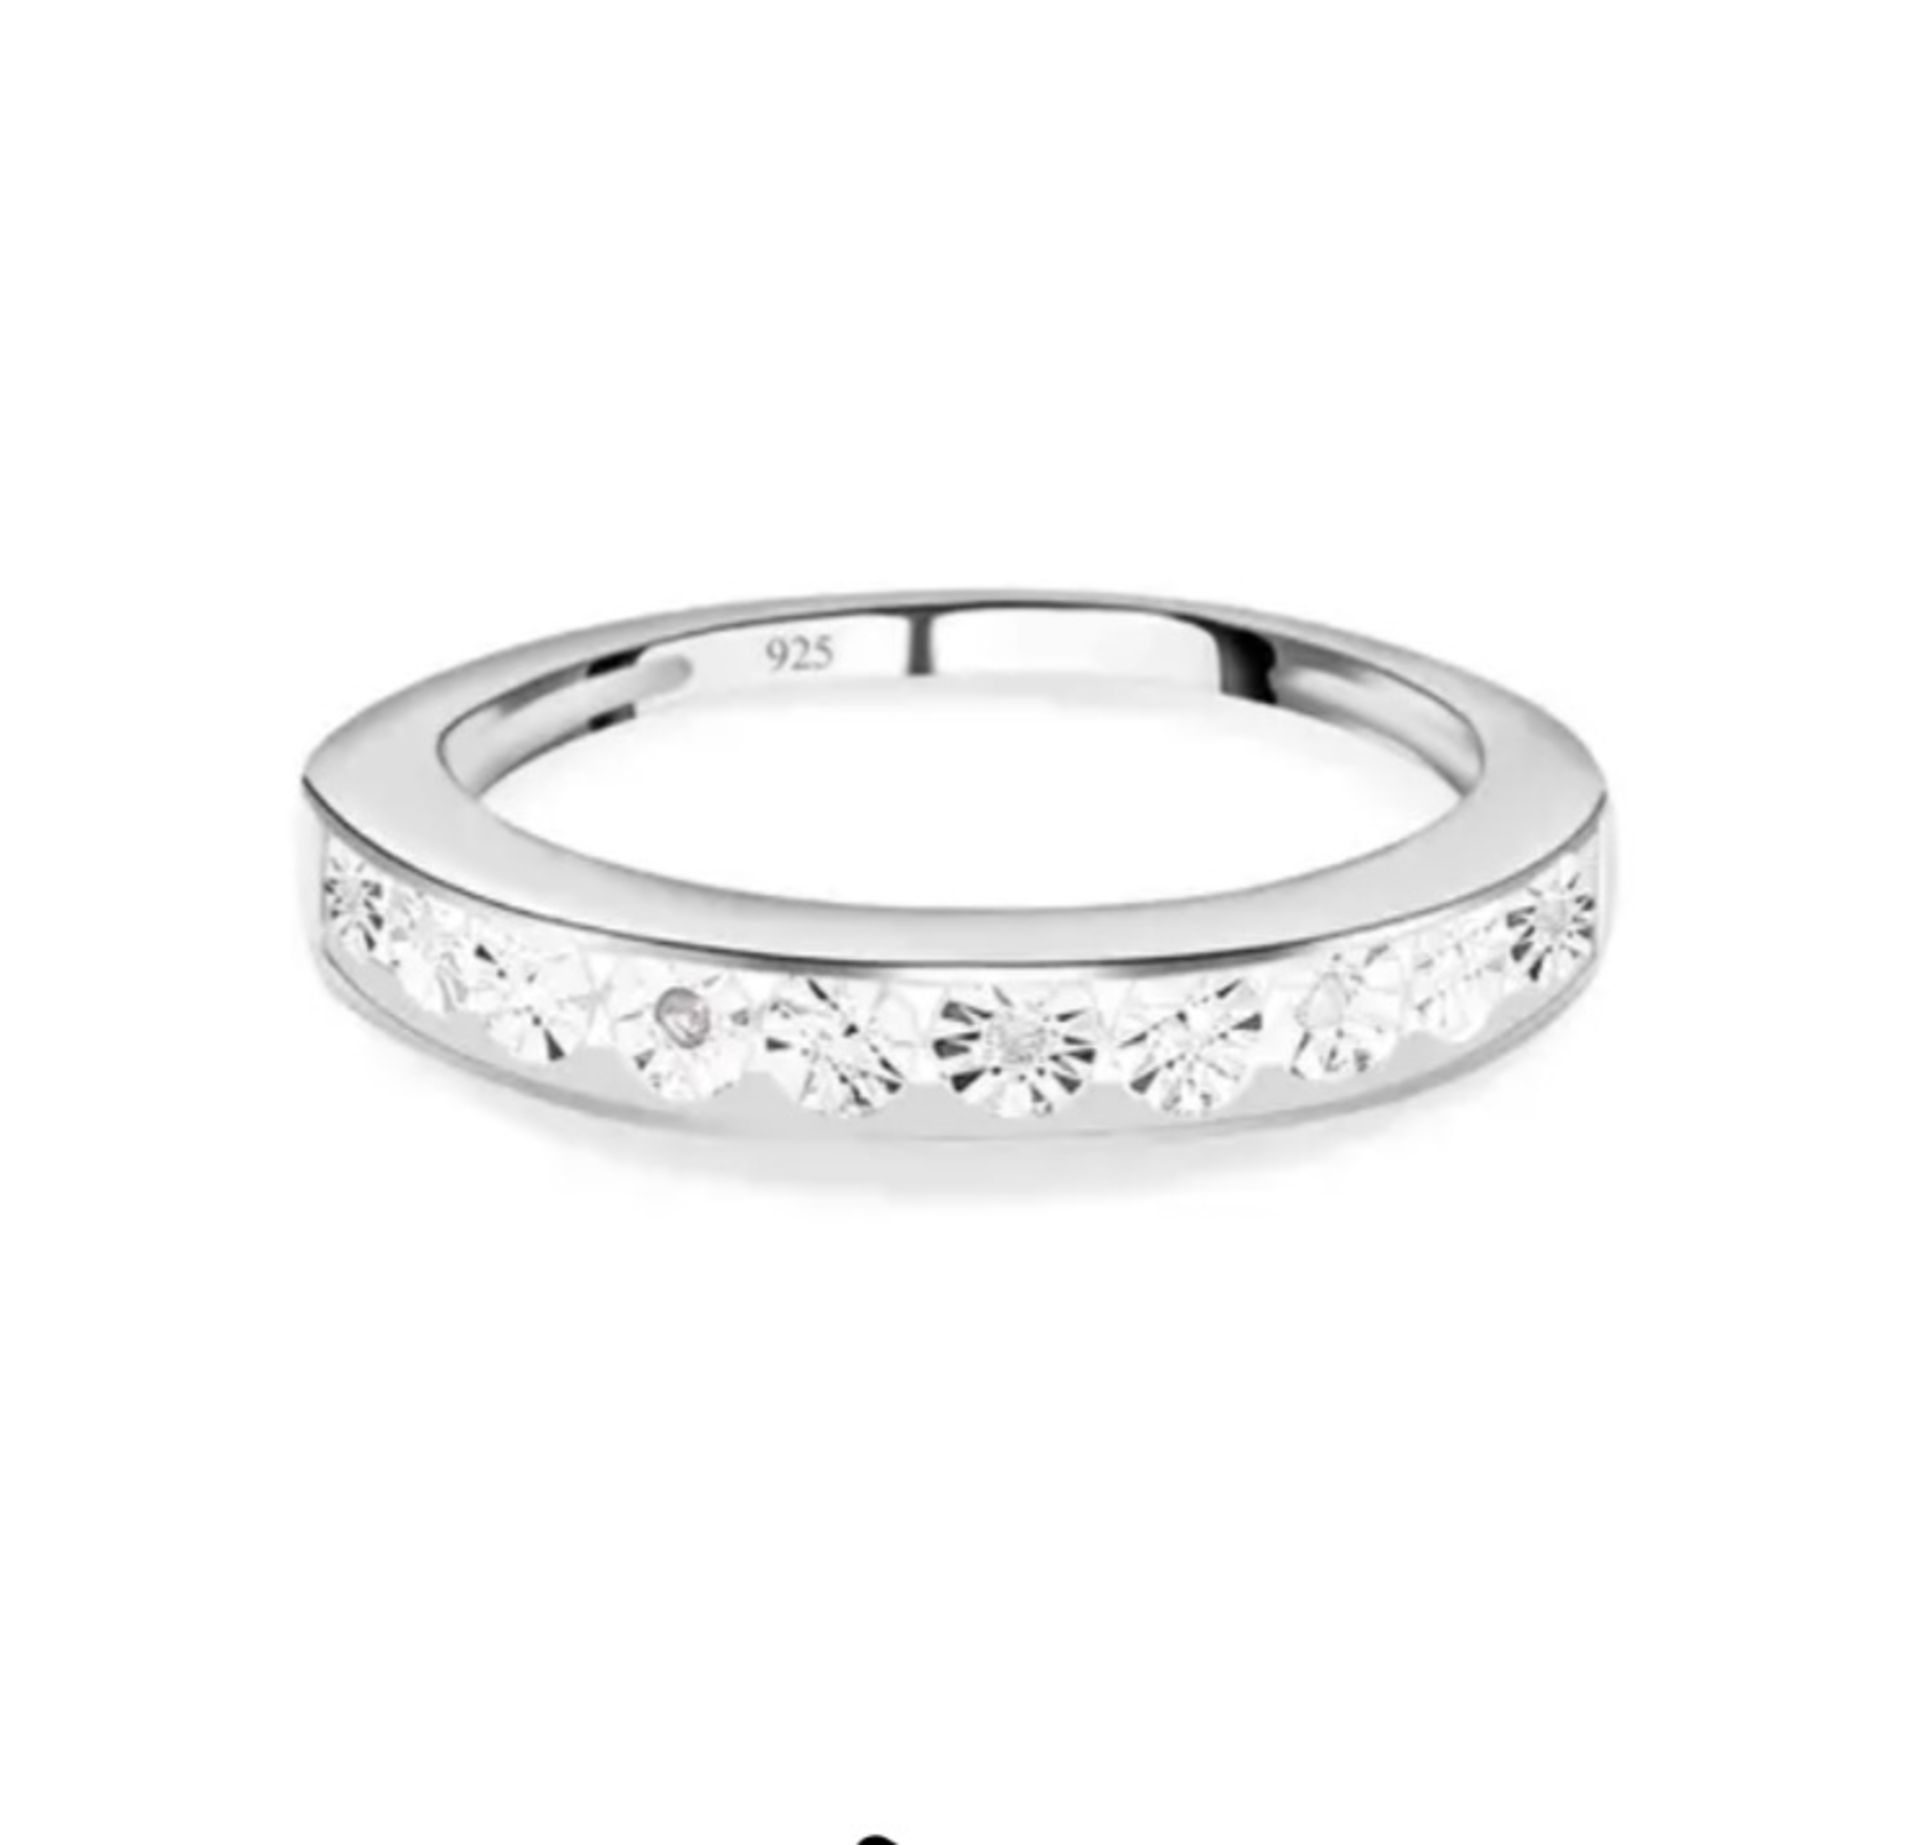 New! Diamond Half Eternity Ring In Sterling Silver - Image 2 of 4